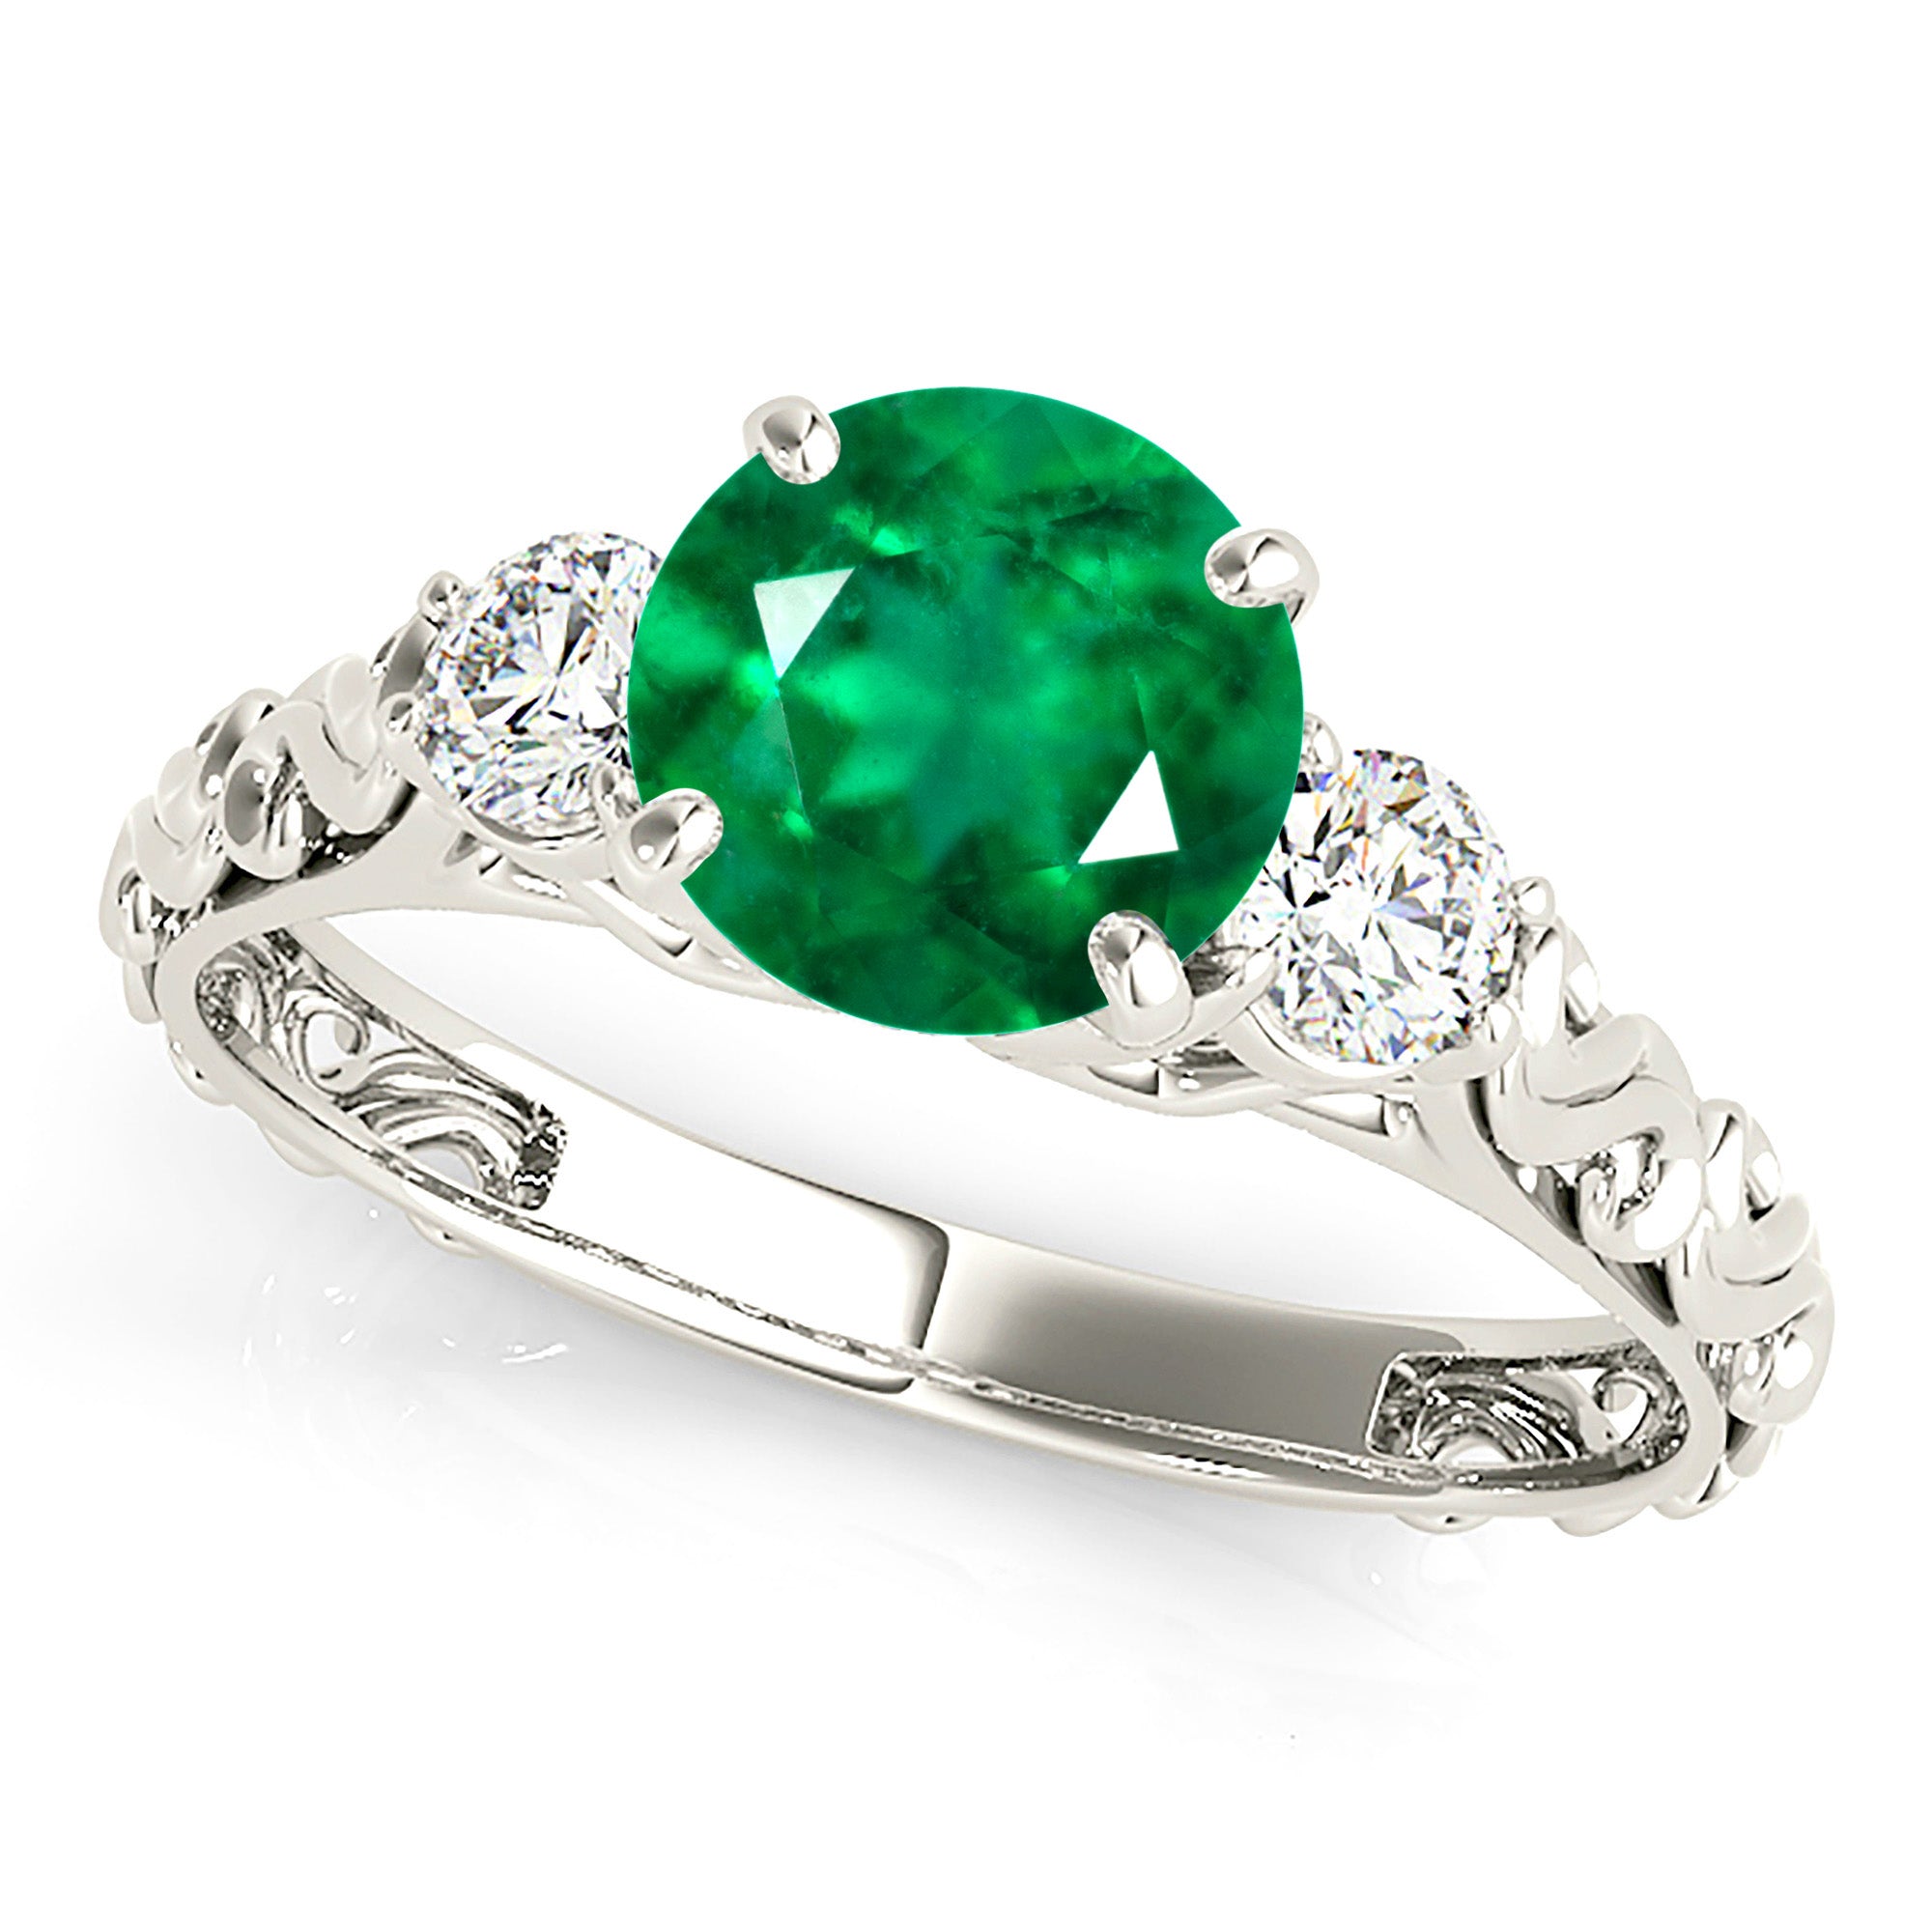 1.14 ct. Genuine Solitaire Emerald Ring With 0.25 ctw. Diamond Hand Carved Filigree Band-in 14K/18K White, Yellow, Rose Gold and Platinum - Christmas Jewelry Gift -VIRABYANI